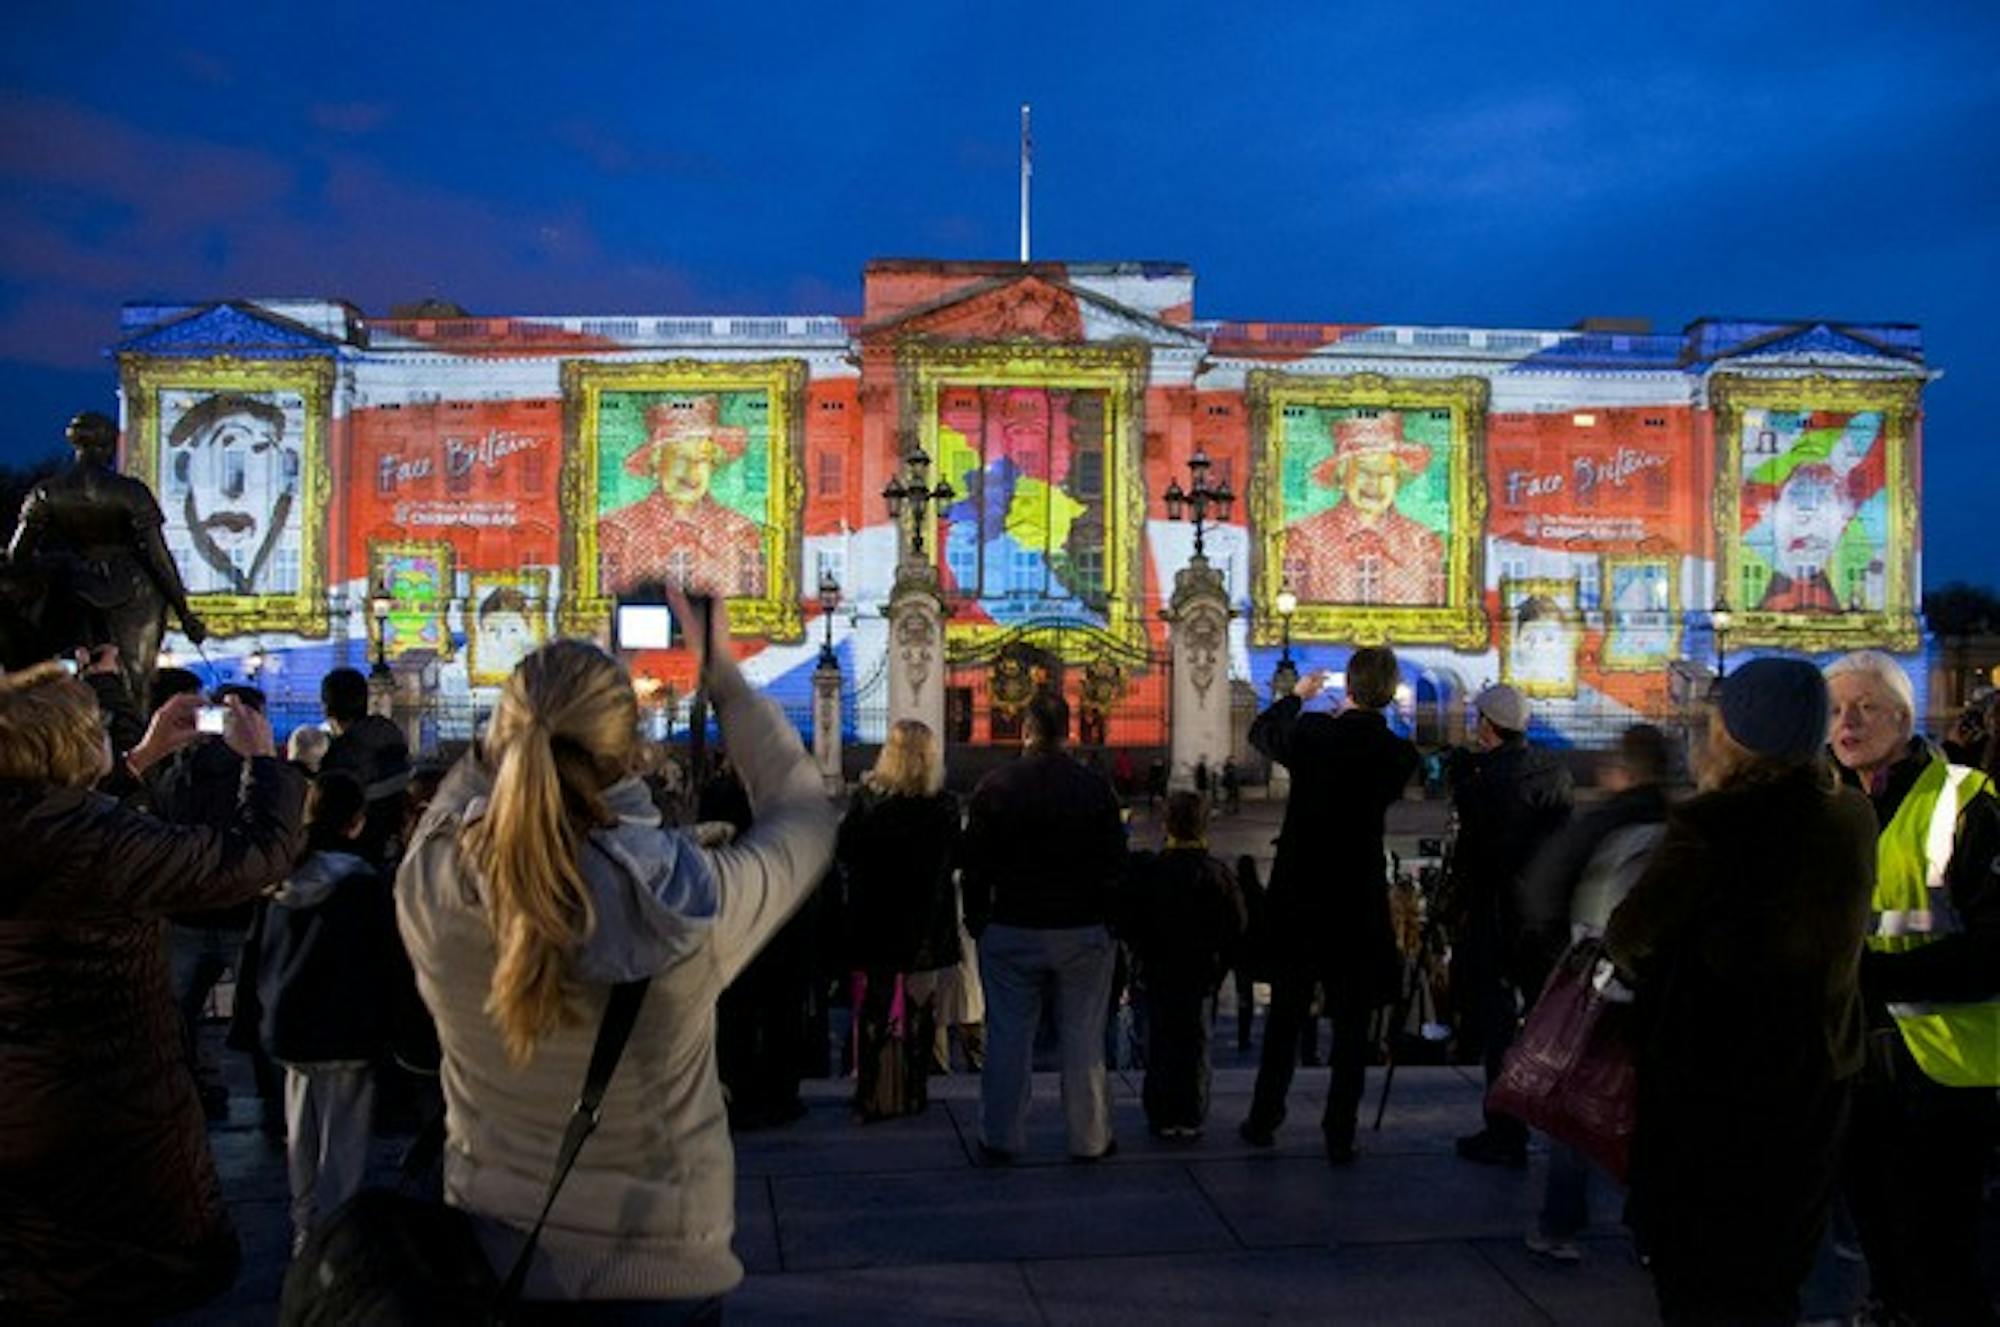 The display to be projected on the Hopkins Center will be an homage to the building's 50-year history. Ashton has previous projected work onto the front of Buckingham Palace in London.